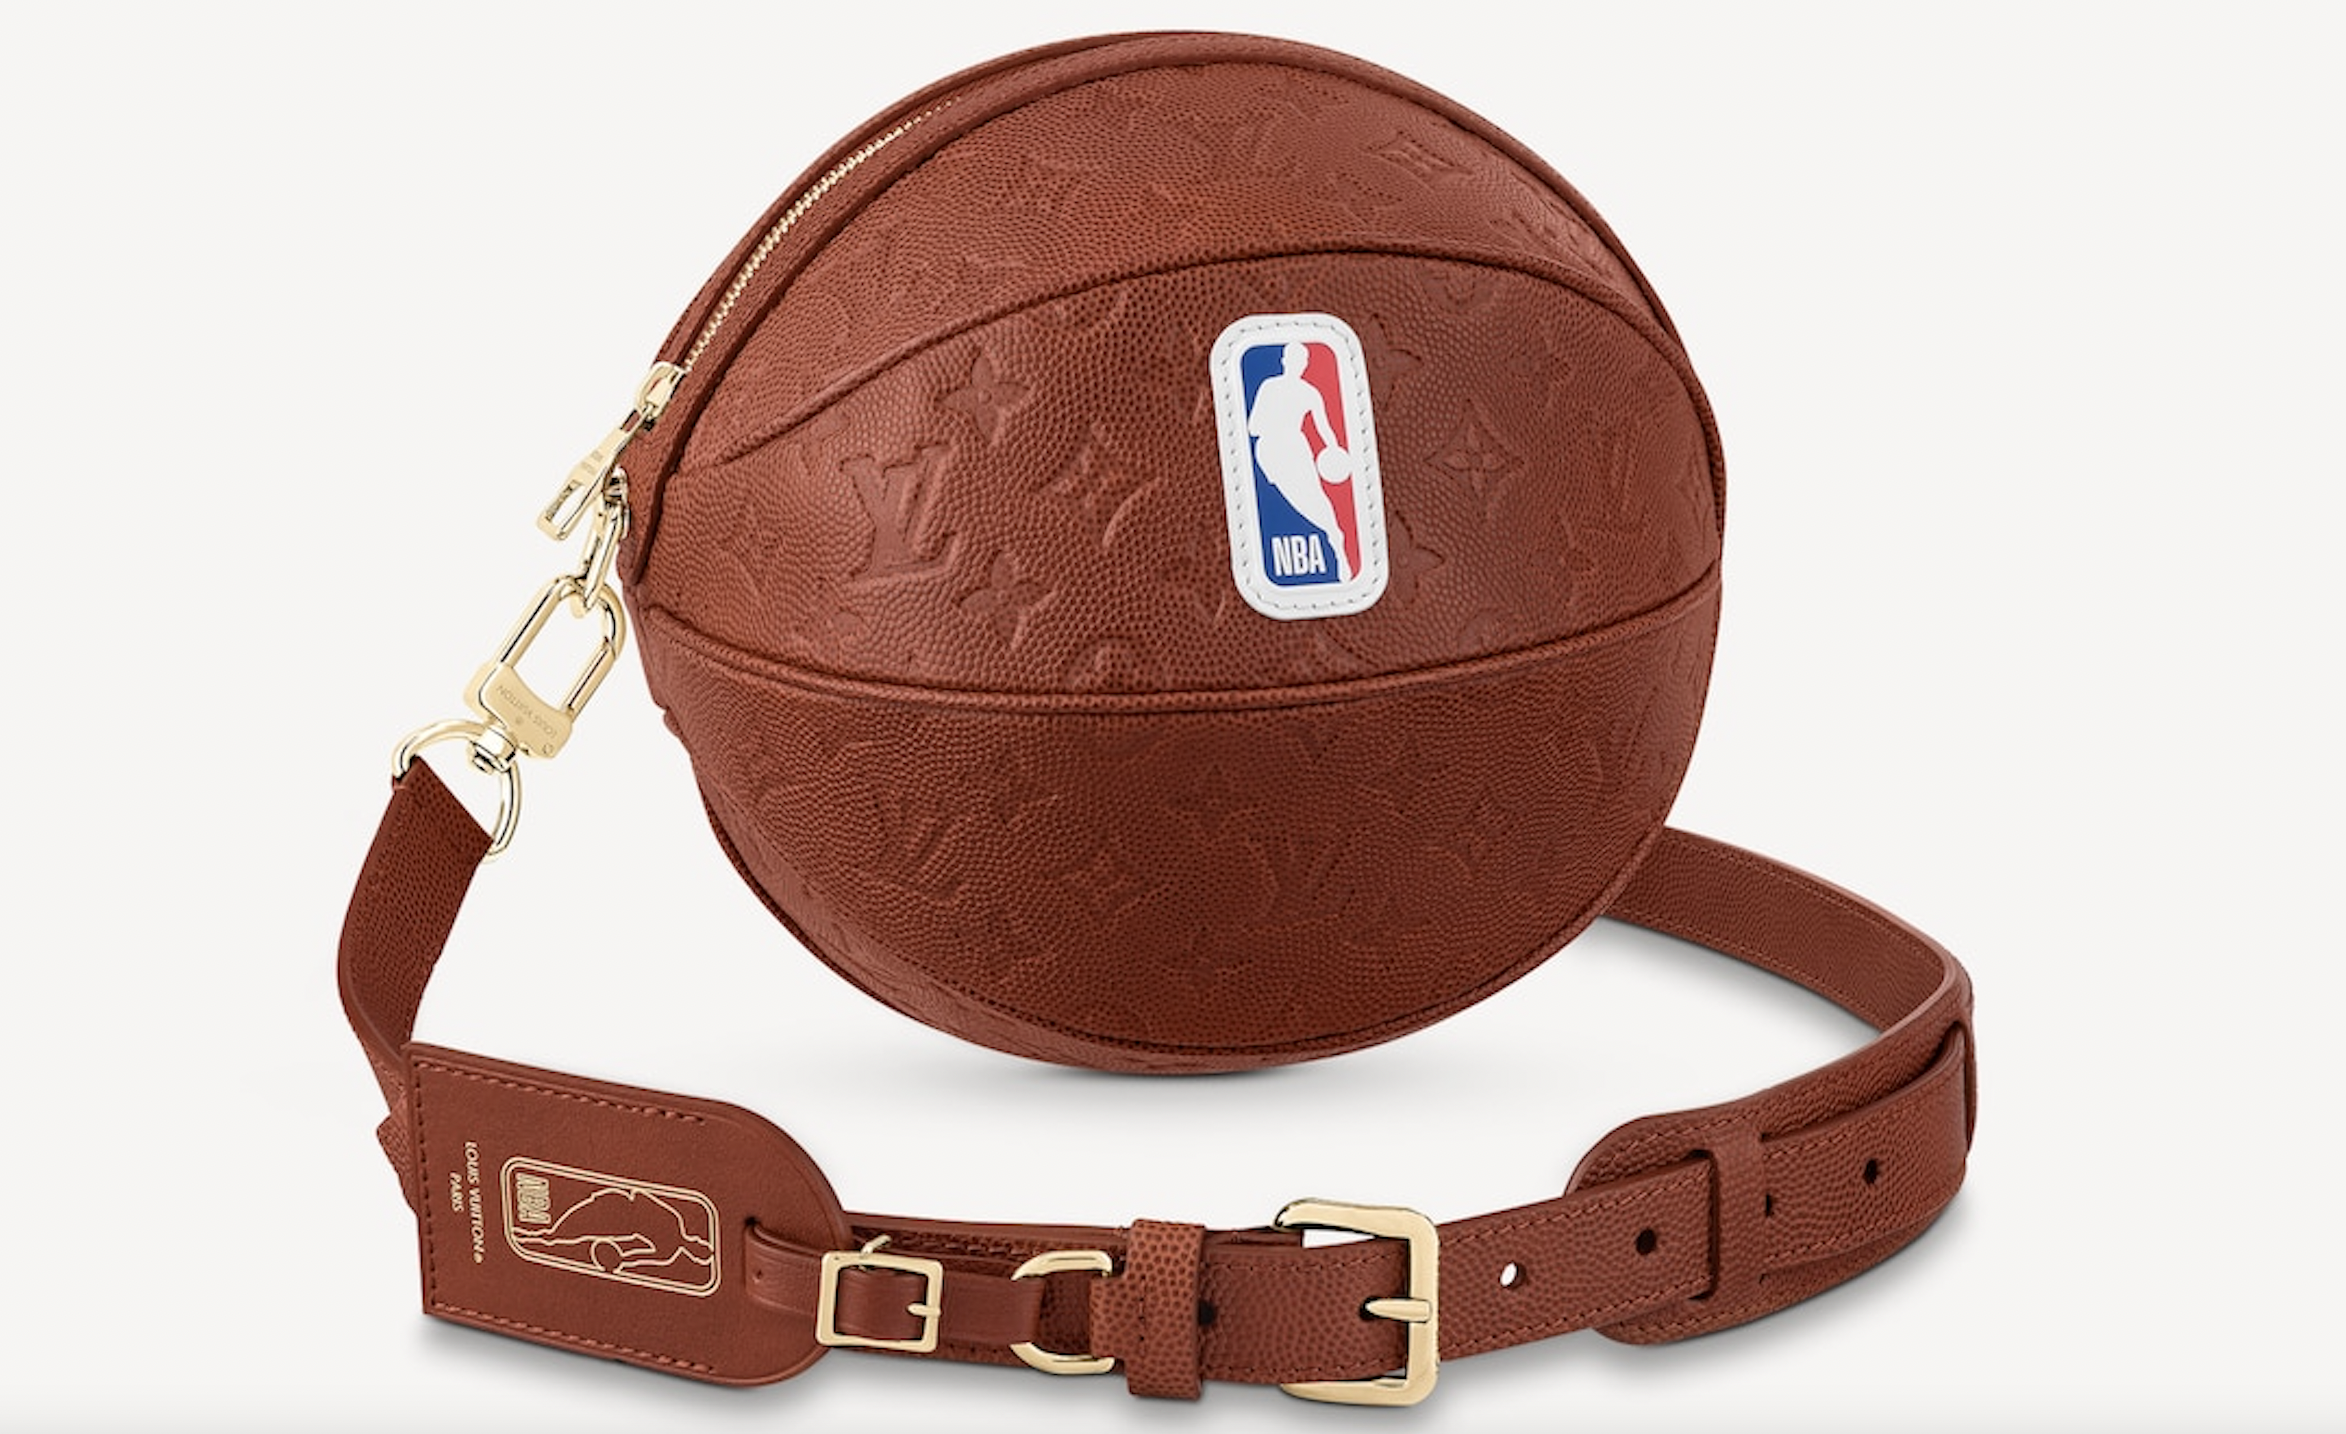 Louis Vuitton Released a $4,450 Basketball Bag 10 Years After Basketball  Commercial Lawsuit - The Fashion Law